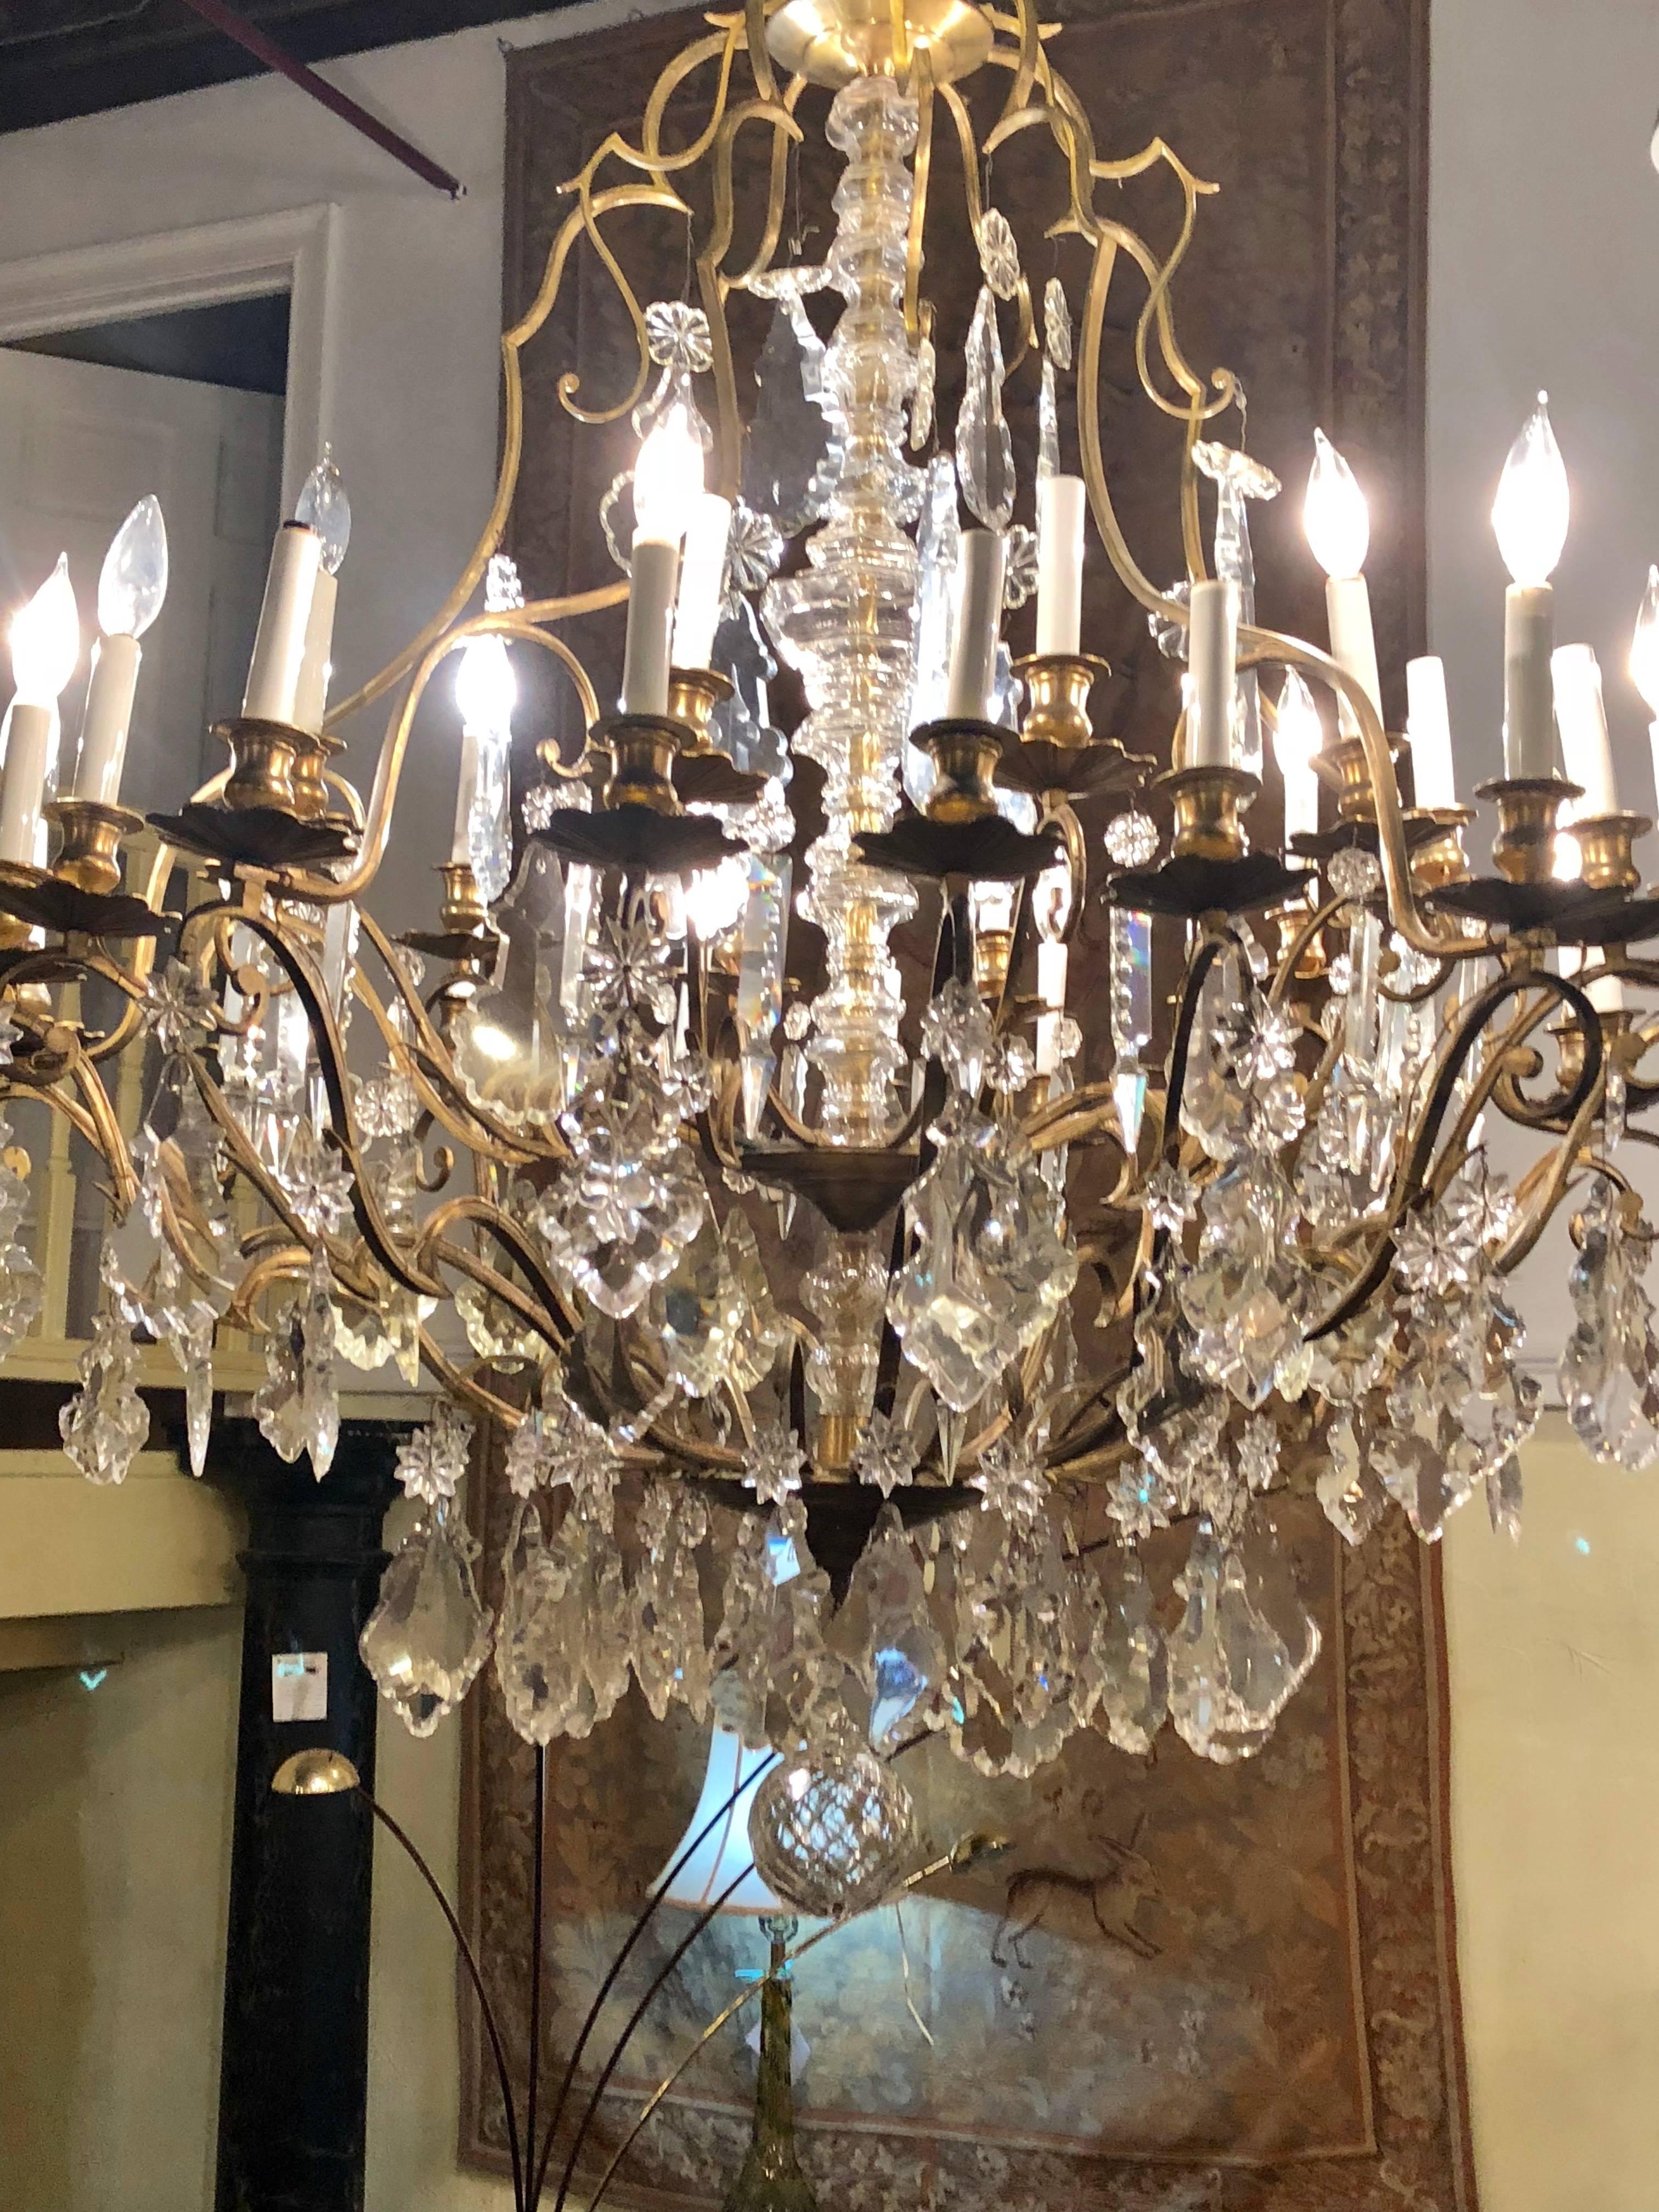 Bronze and crystal palatial thirty-light chandelier having a central column-form glass. This thirty-light chandelier has an extra long chain and matching canapé. Each antique bronze arm stemming form a center column of glass. All of the arms